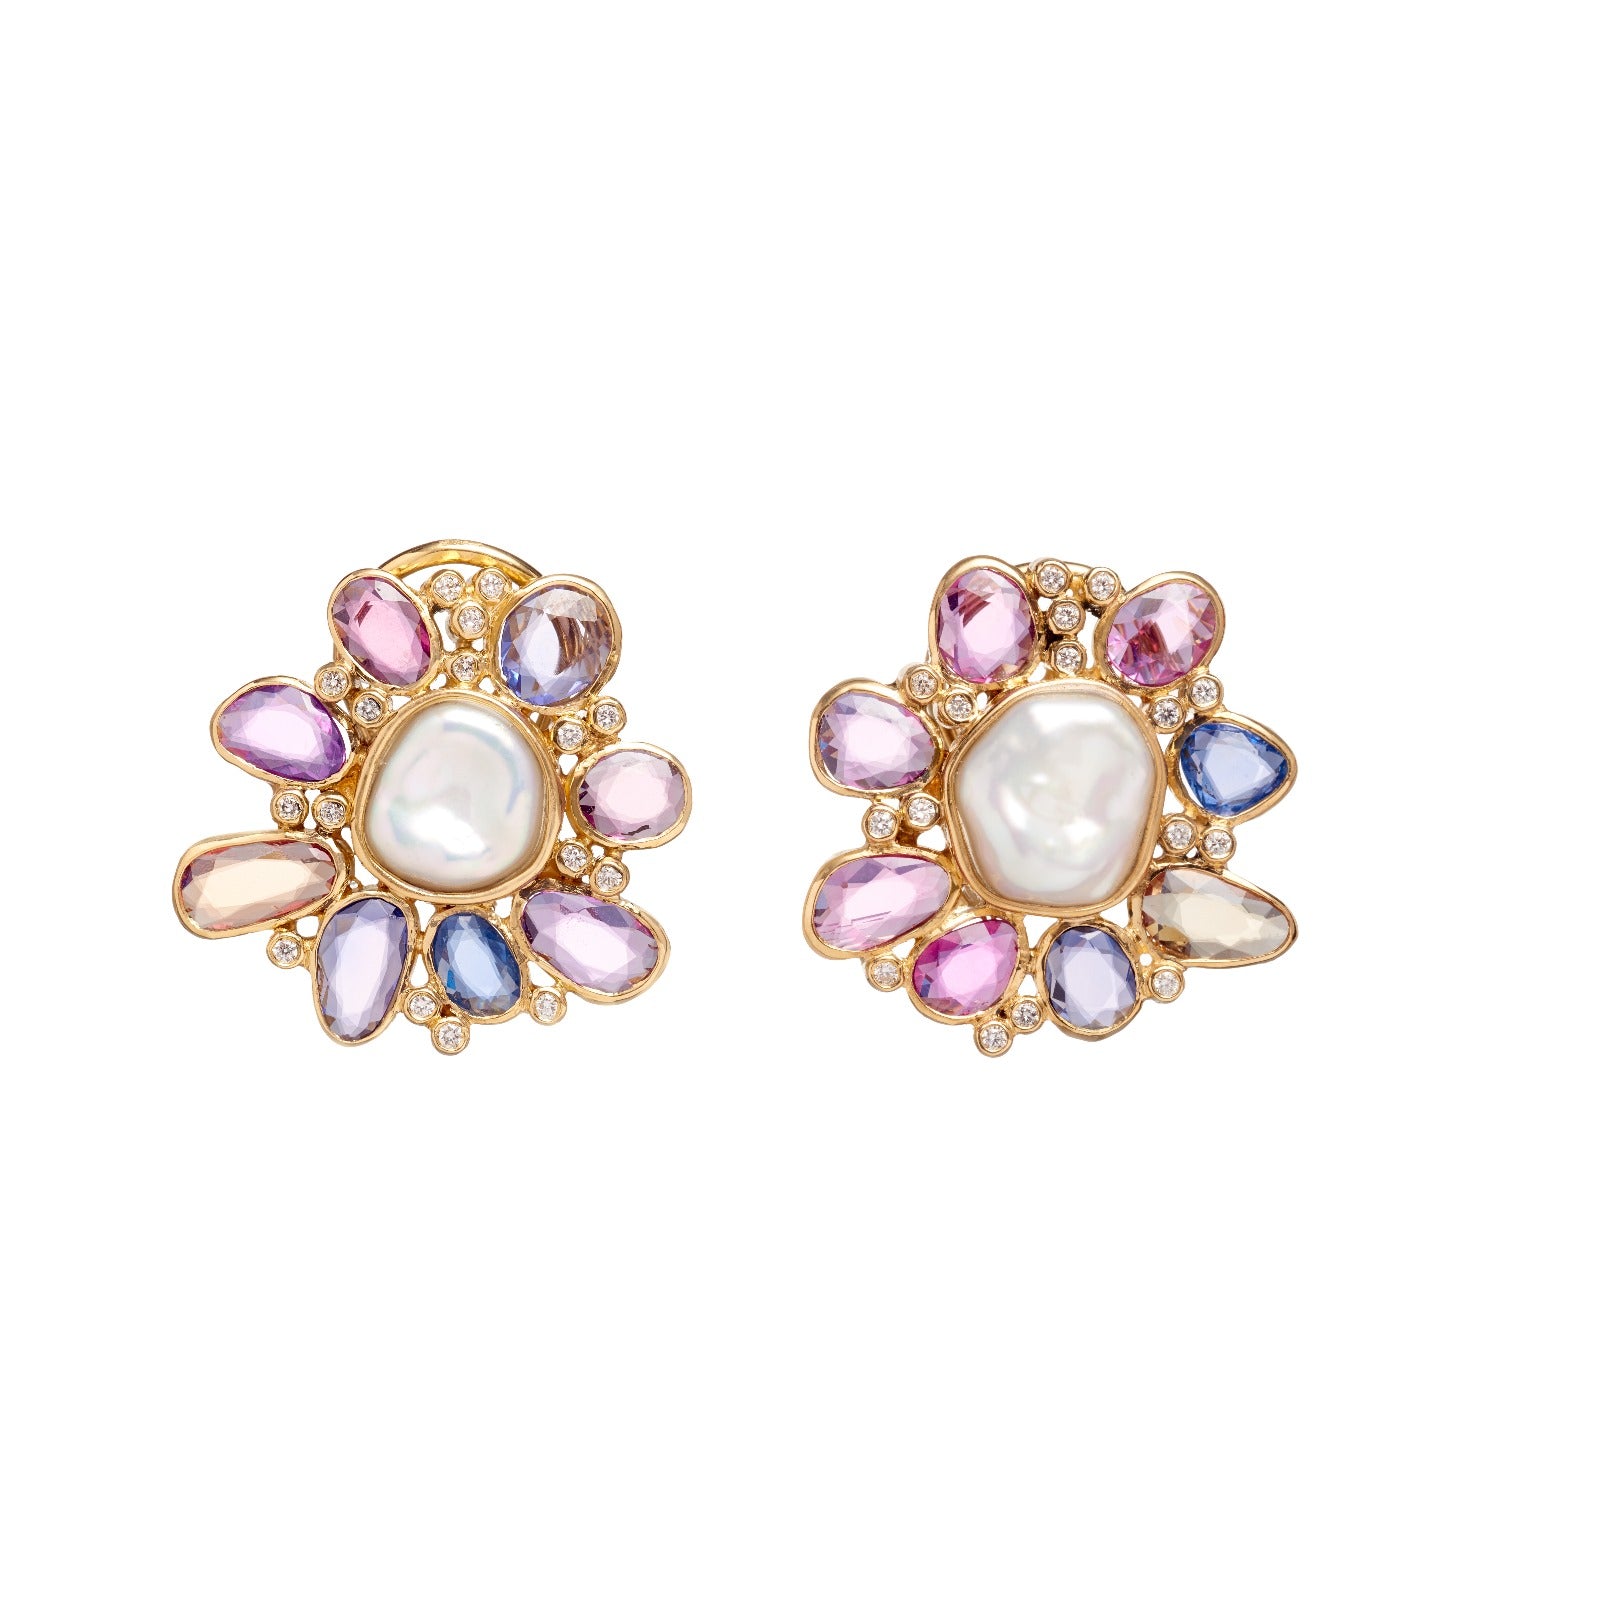 Earrigns with Diamonds, Sapphires and Pearls